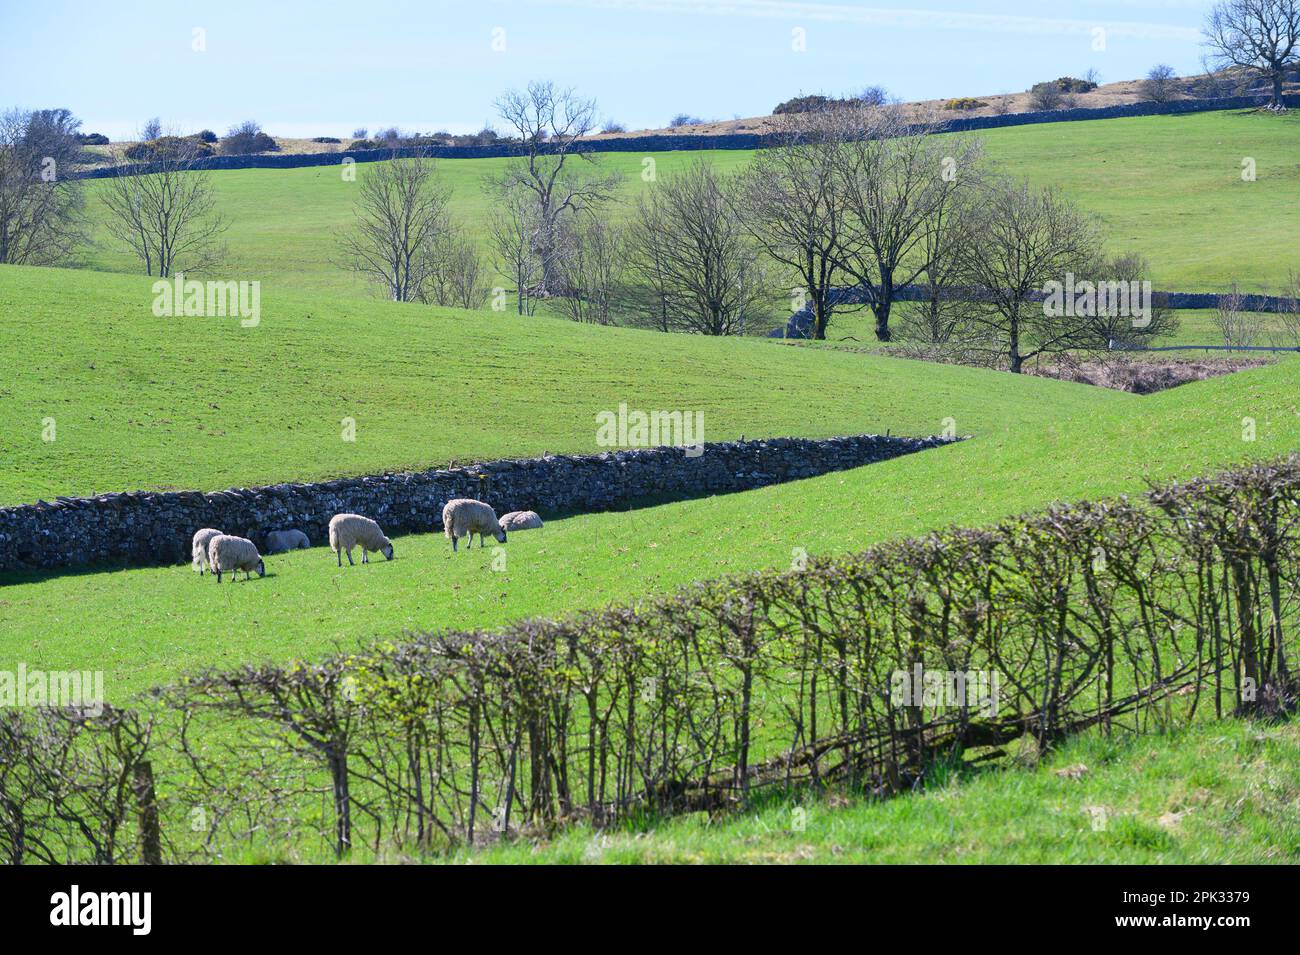 Southern Lake District, UK. Near Kendal - hedges, dry stone walls and fields for grazing sheep (taken from Windermere Road - A5284) early April Stock Photo